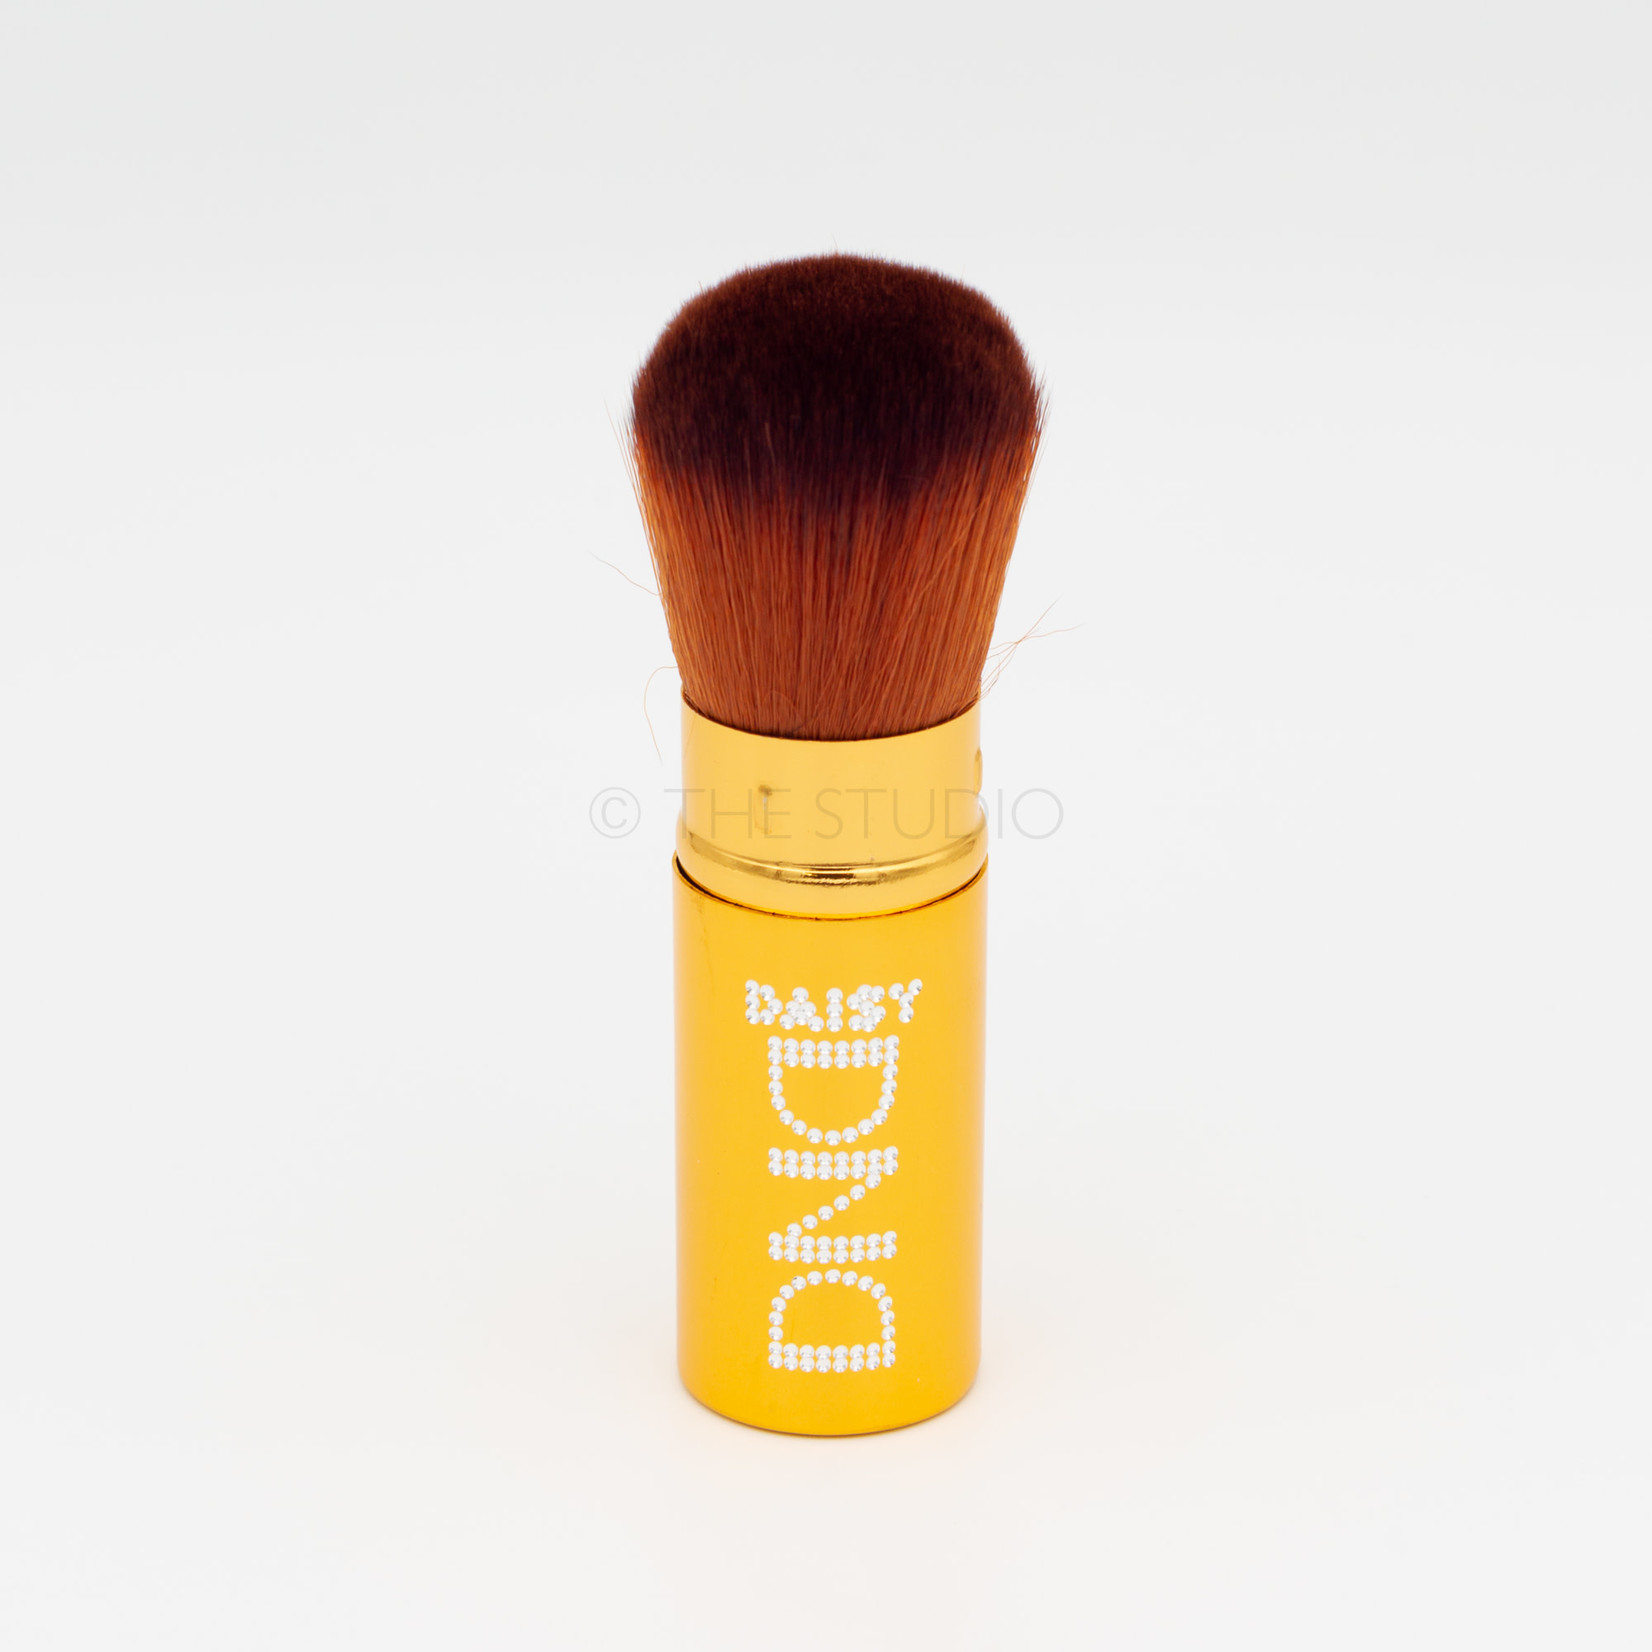 DND DND - Nail Dust Brush - Gold - Large